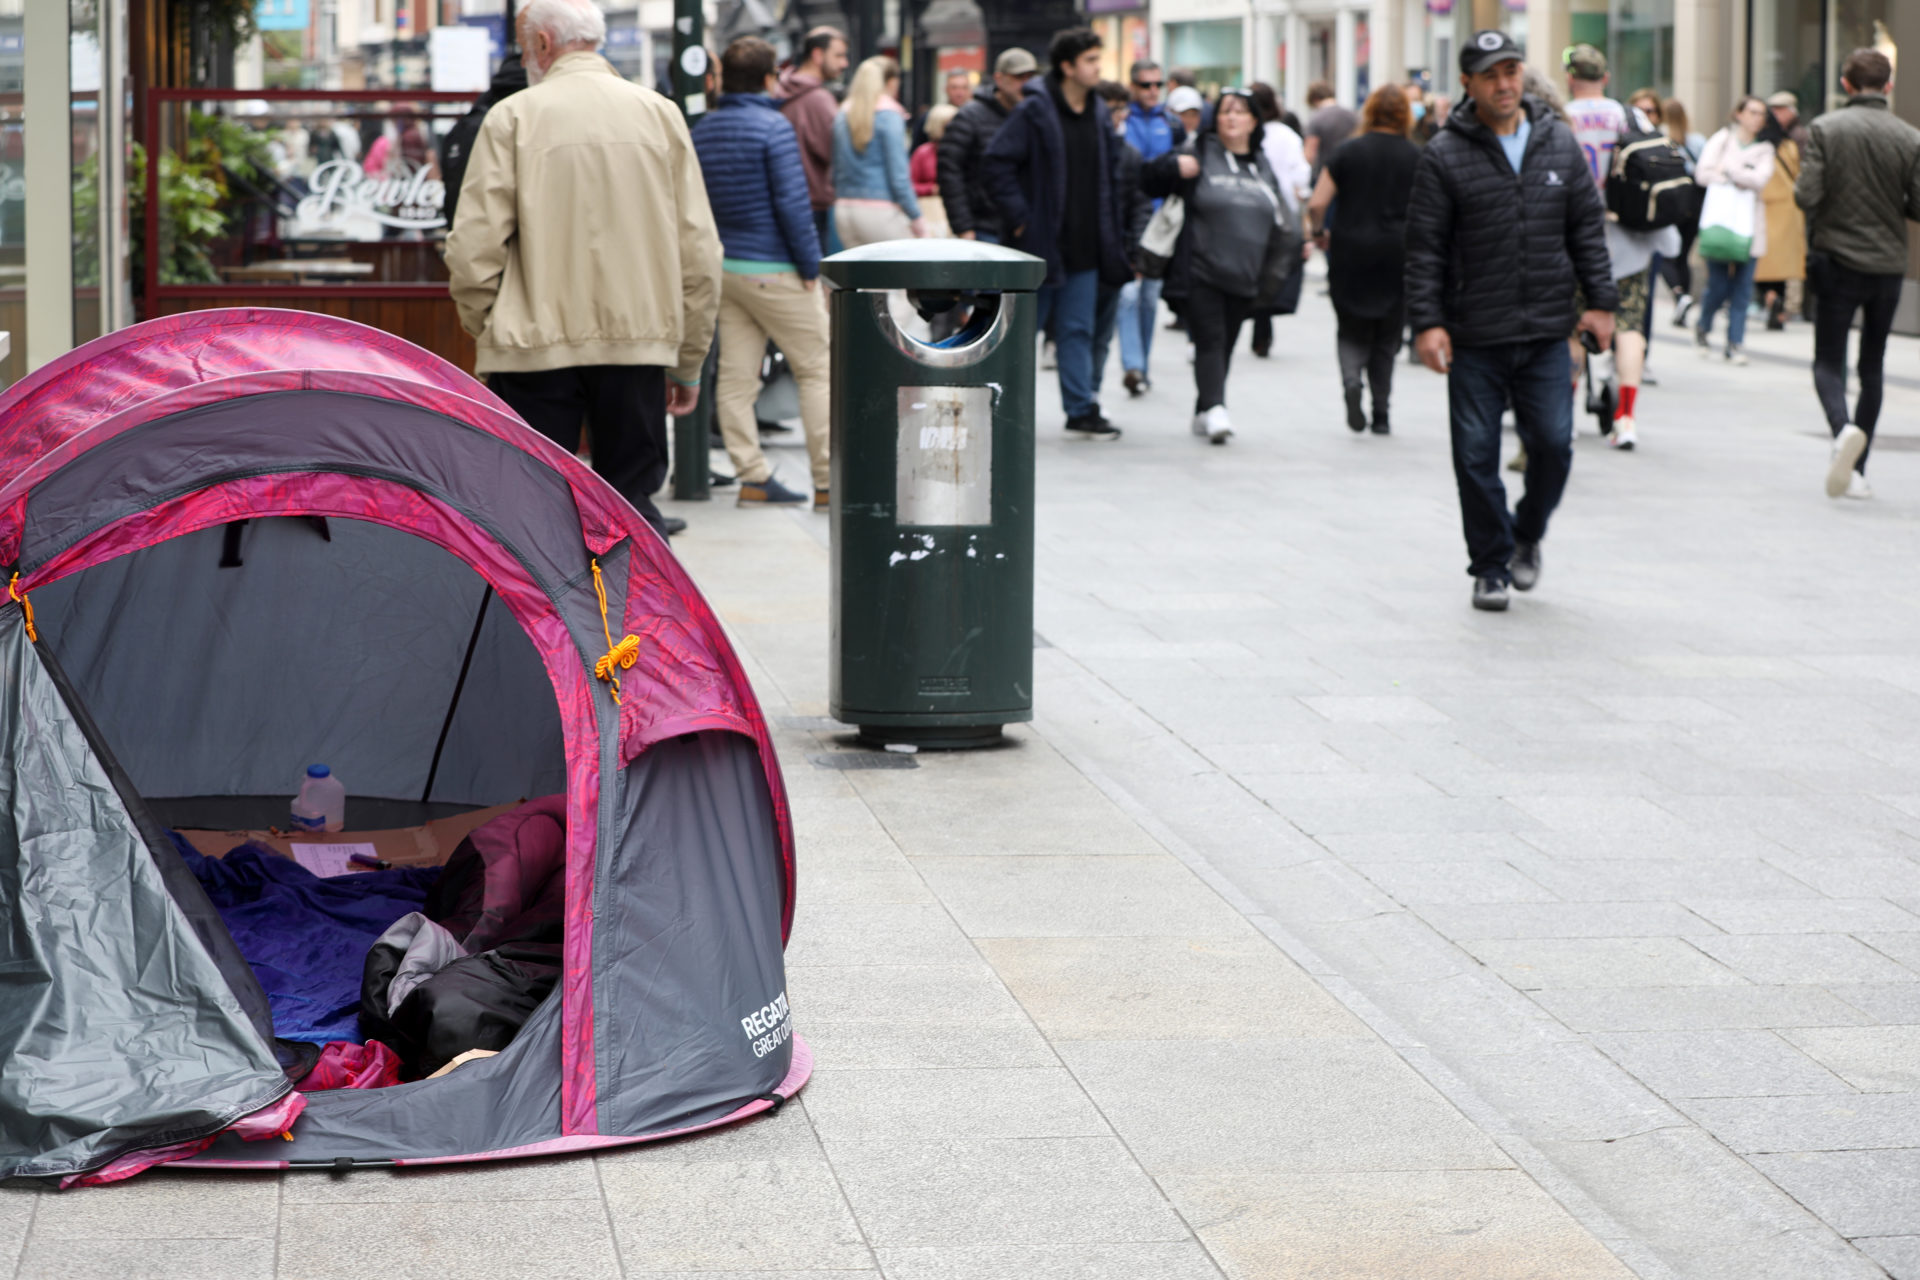 People sleeping rough in a tent on Grafton Street Dublin as shoppers walk past, 07-05-2022. Image: Leah Farrell/RollingNews